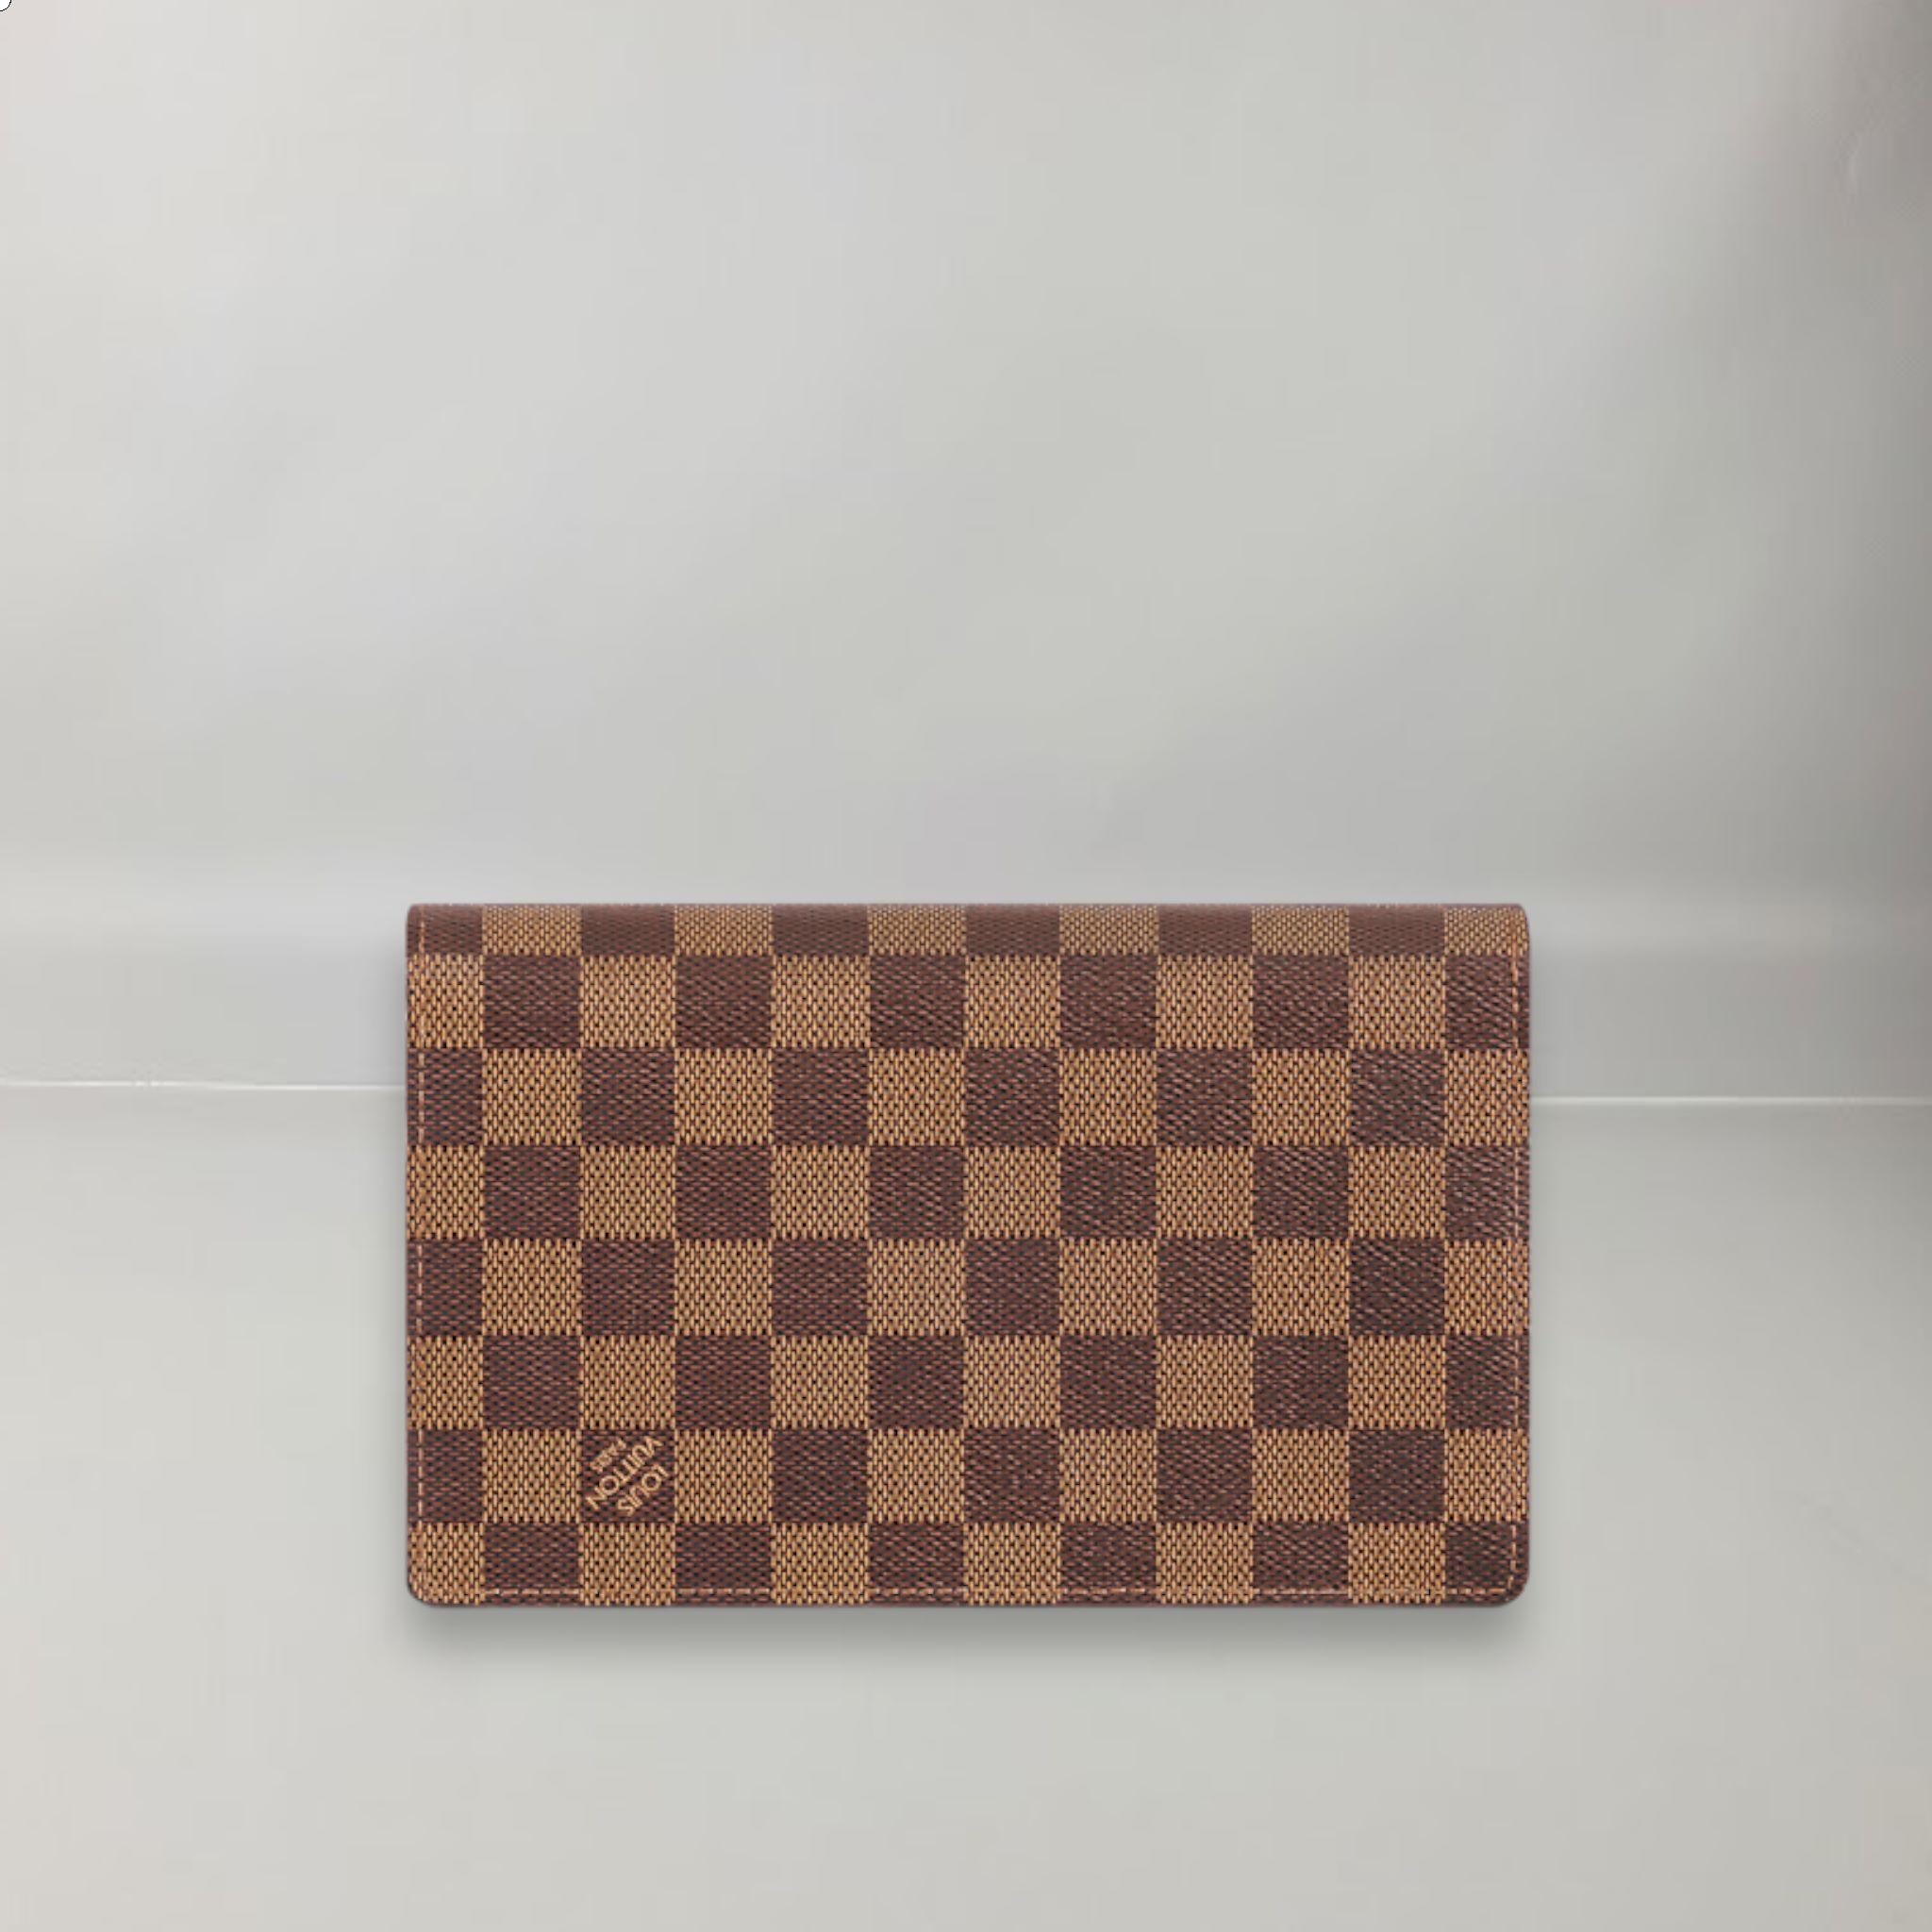 Crème Beige / Vénus Pink
Damier Ebene coated canvas and cowhide leather
Cowhide-leather and microfiber lining
Gold-color hardware
Magnetic closure
Large gusseted compartment
Large zipped coin pocket
Flat front pocket
Flat inside pocket
6 card